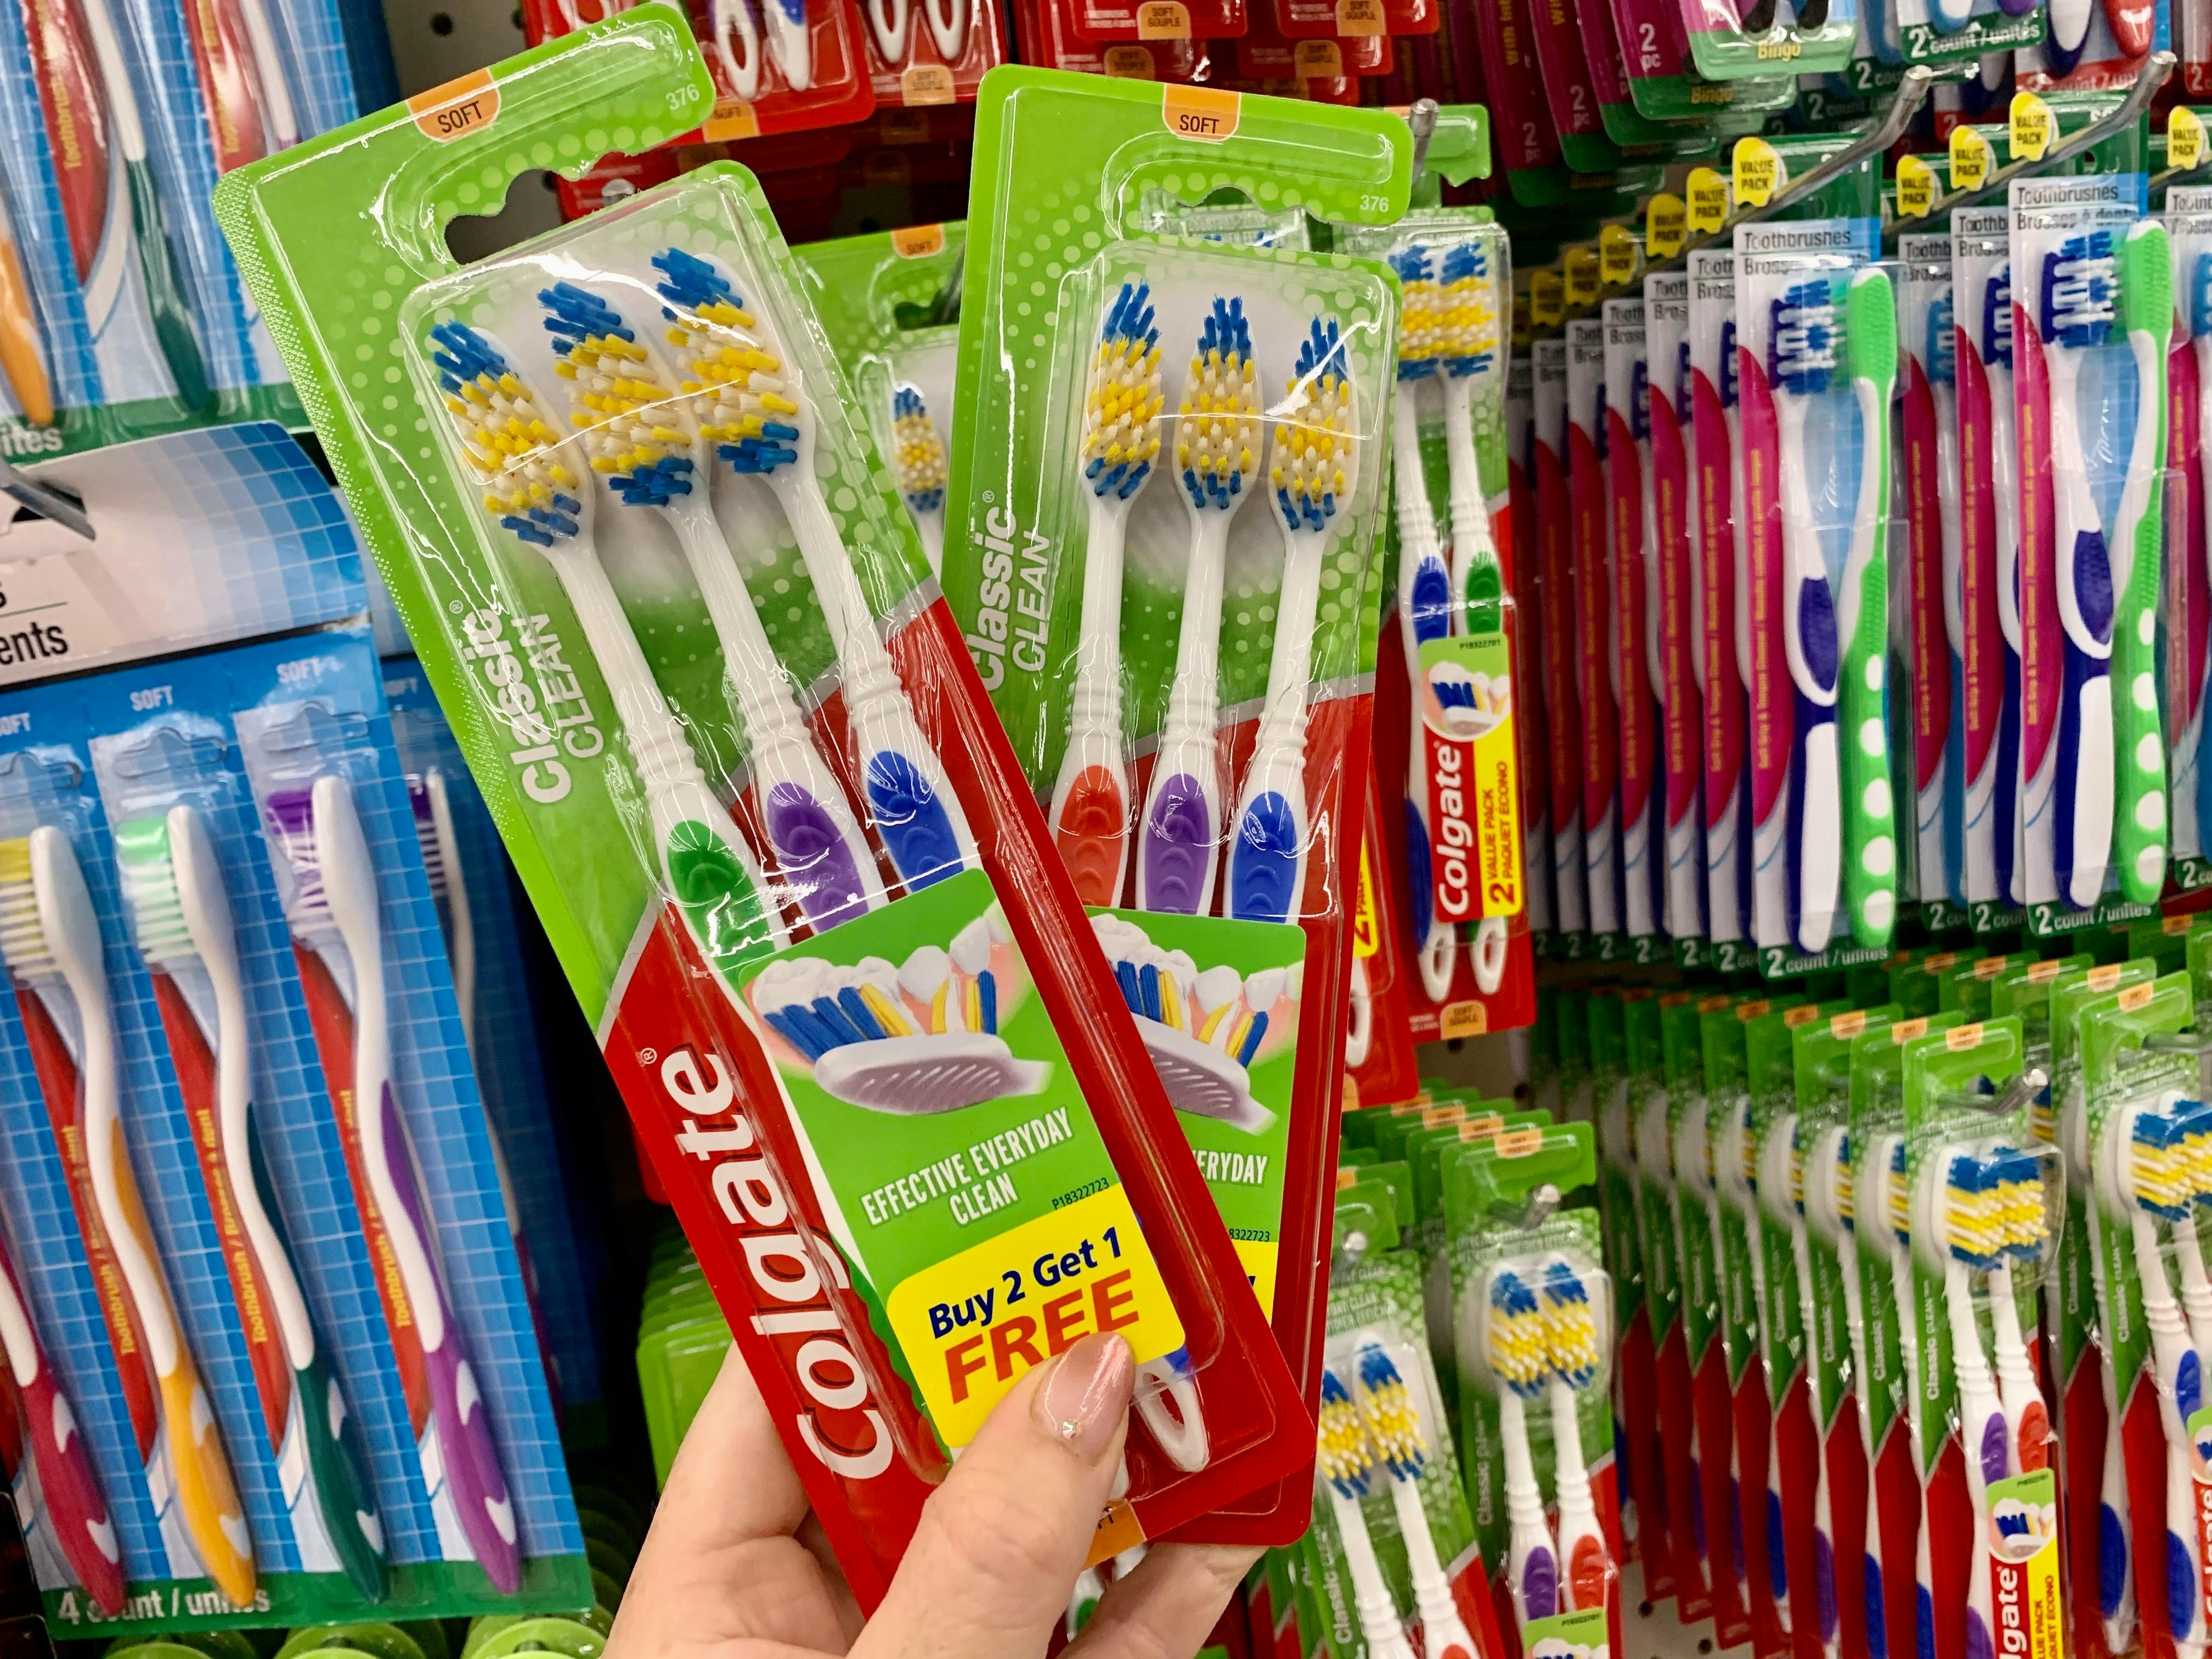 2 packages of toothbrushes being held up together at Dollar Tree